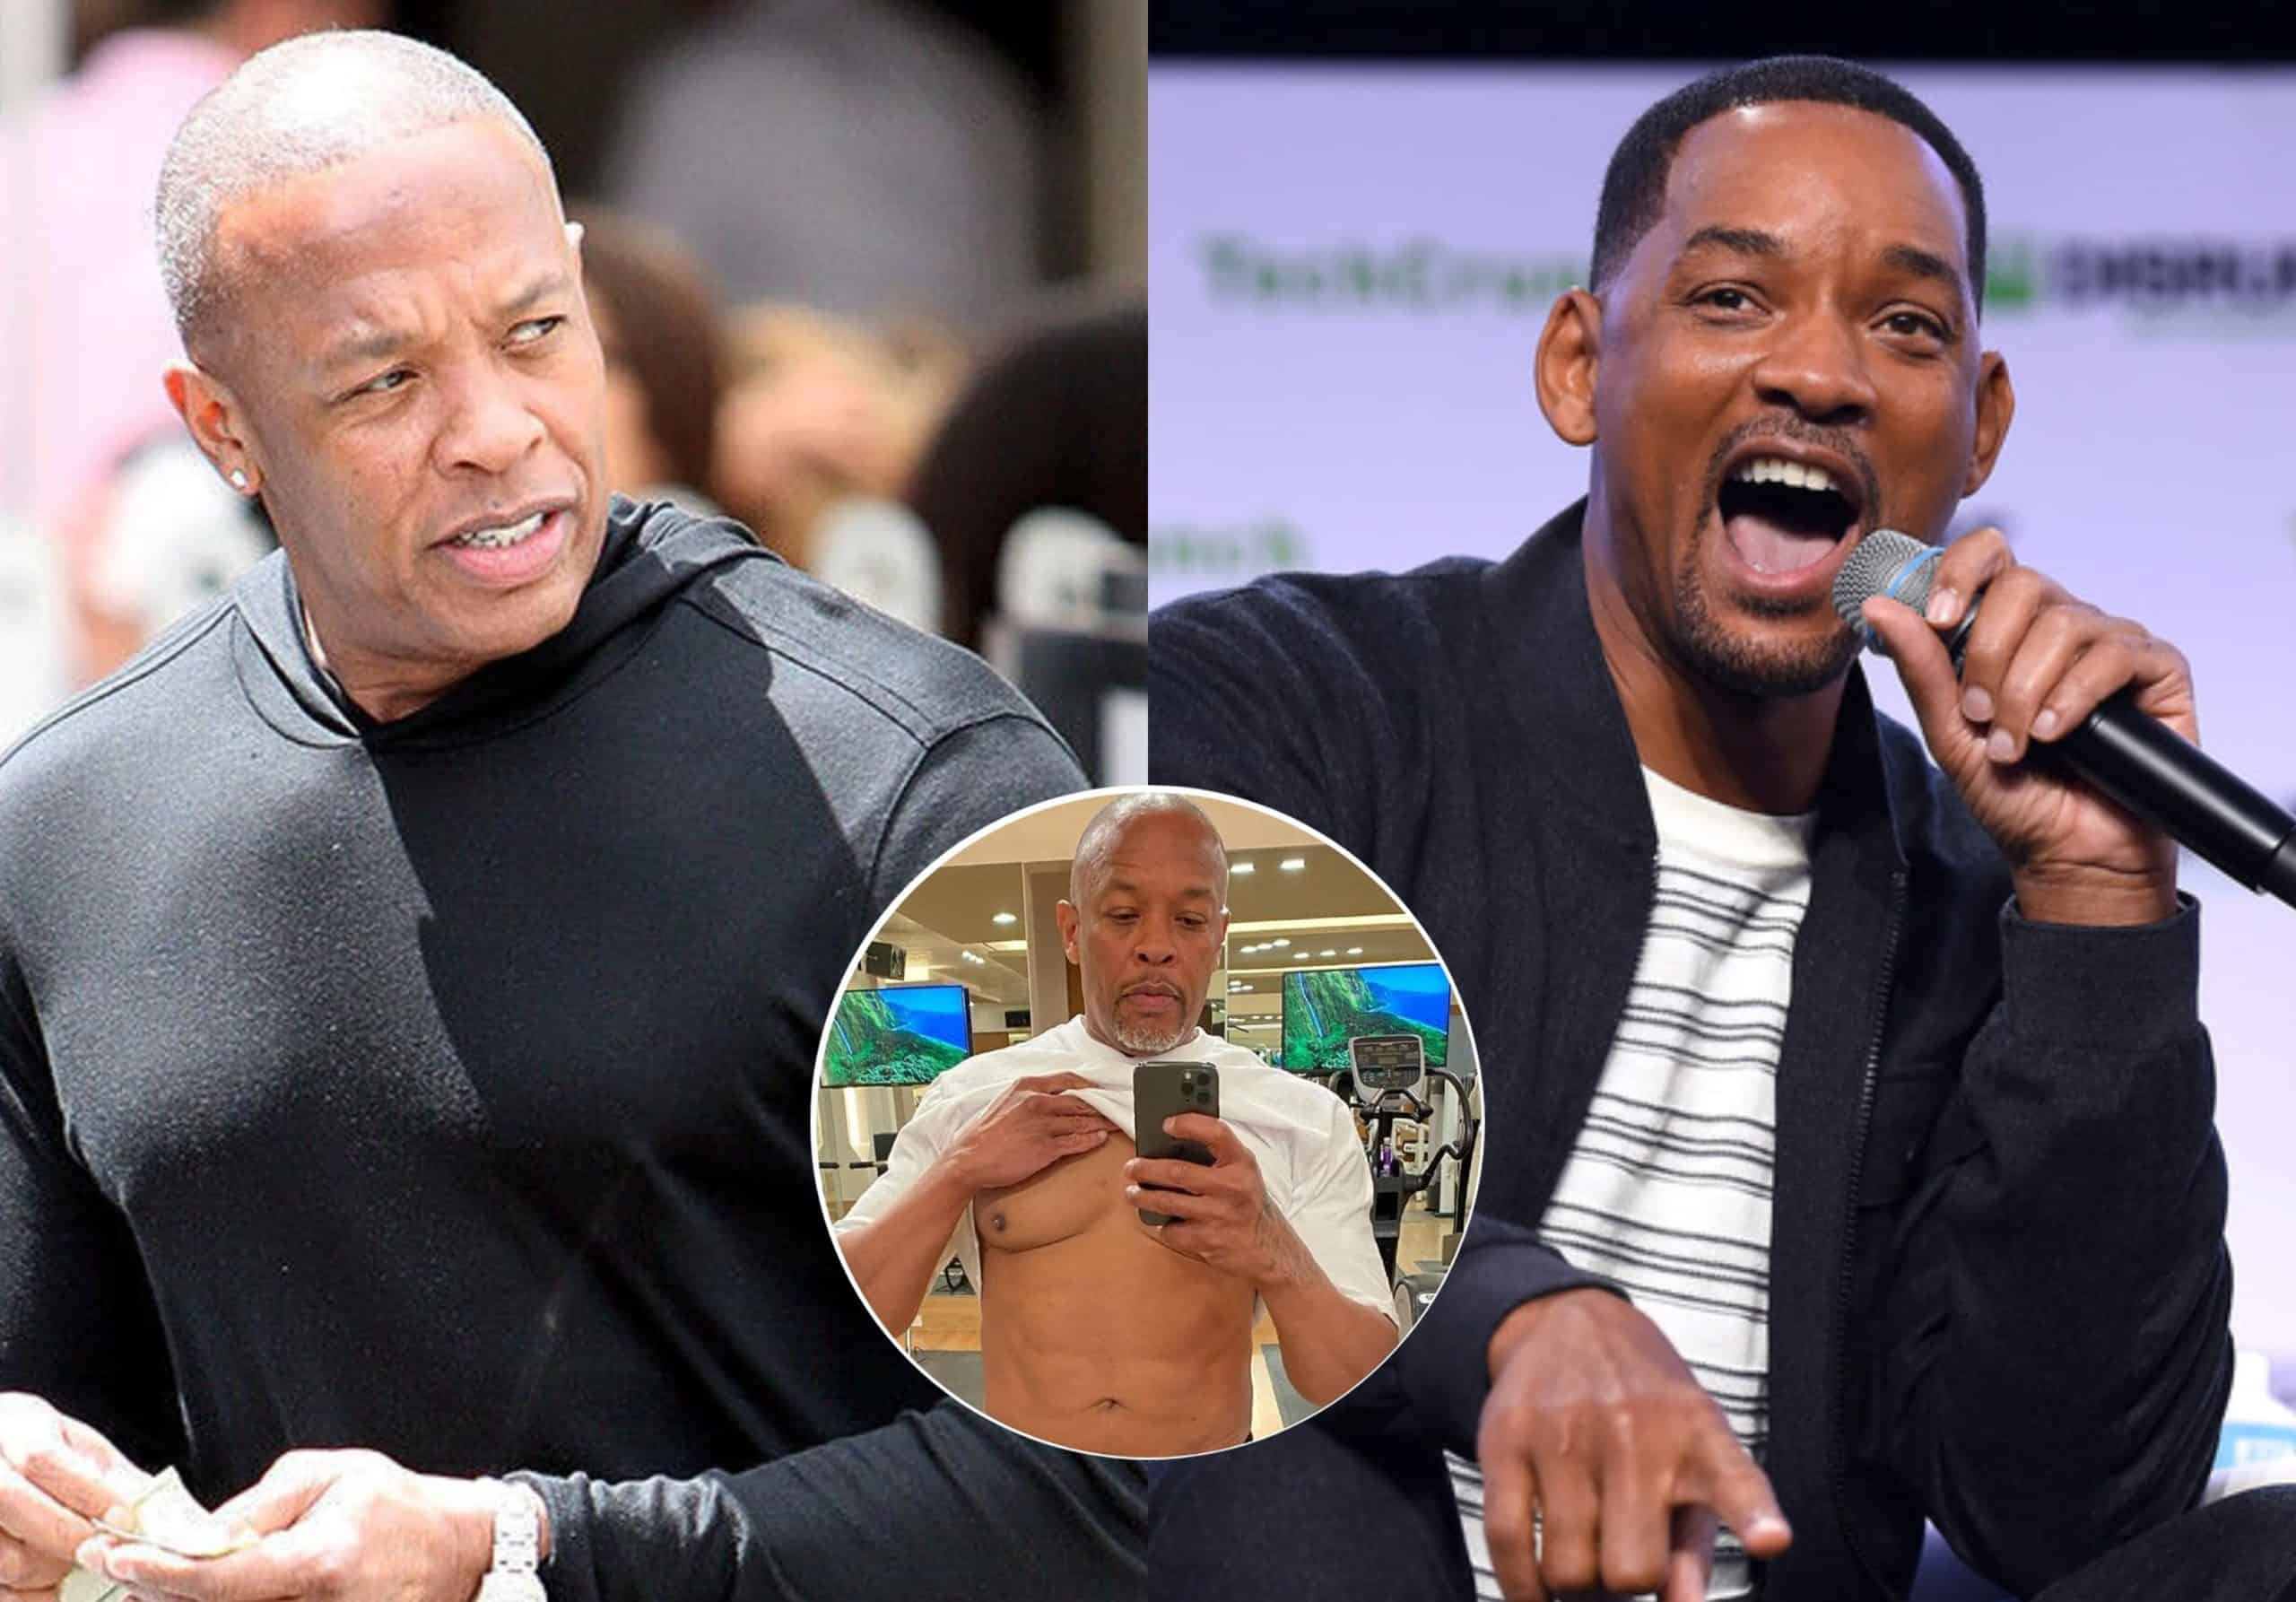 Will Smith Influenced Dr. Dre To Show Off His COVID Body